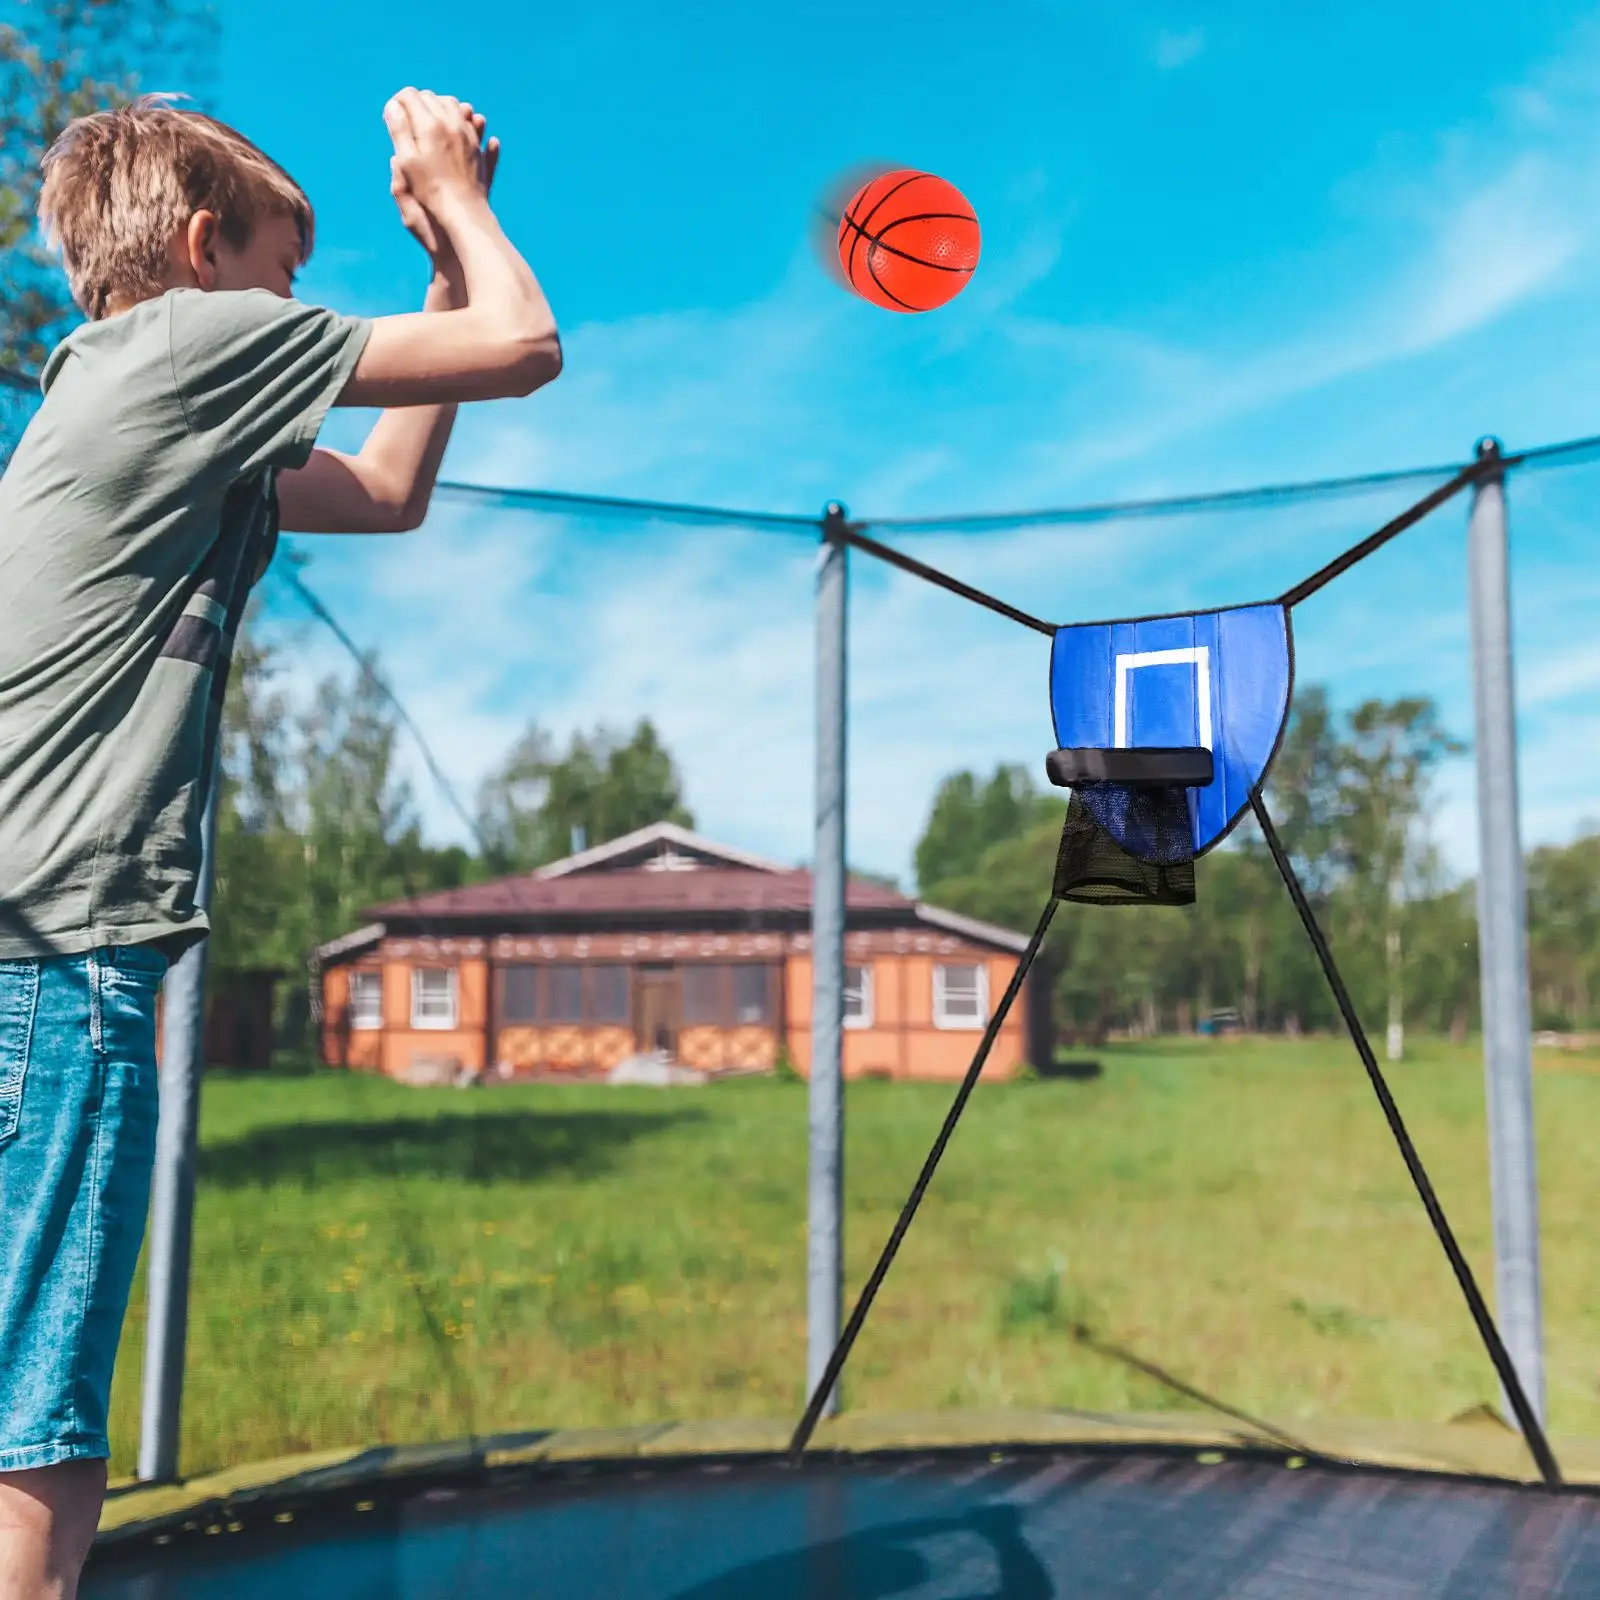 Mini Basketball Hoop for Trampoline Easy to Install Basketball Training Trampoline Accessory for All Ages for Kids Children